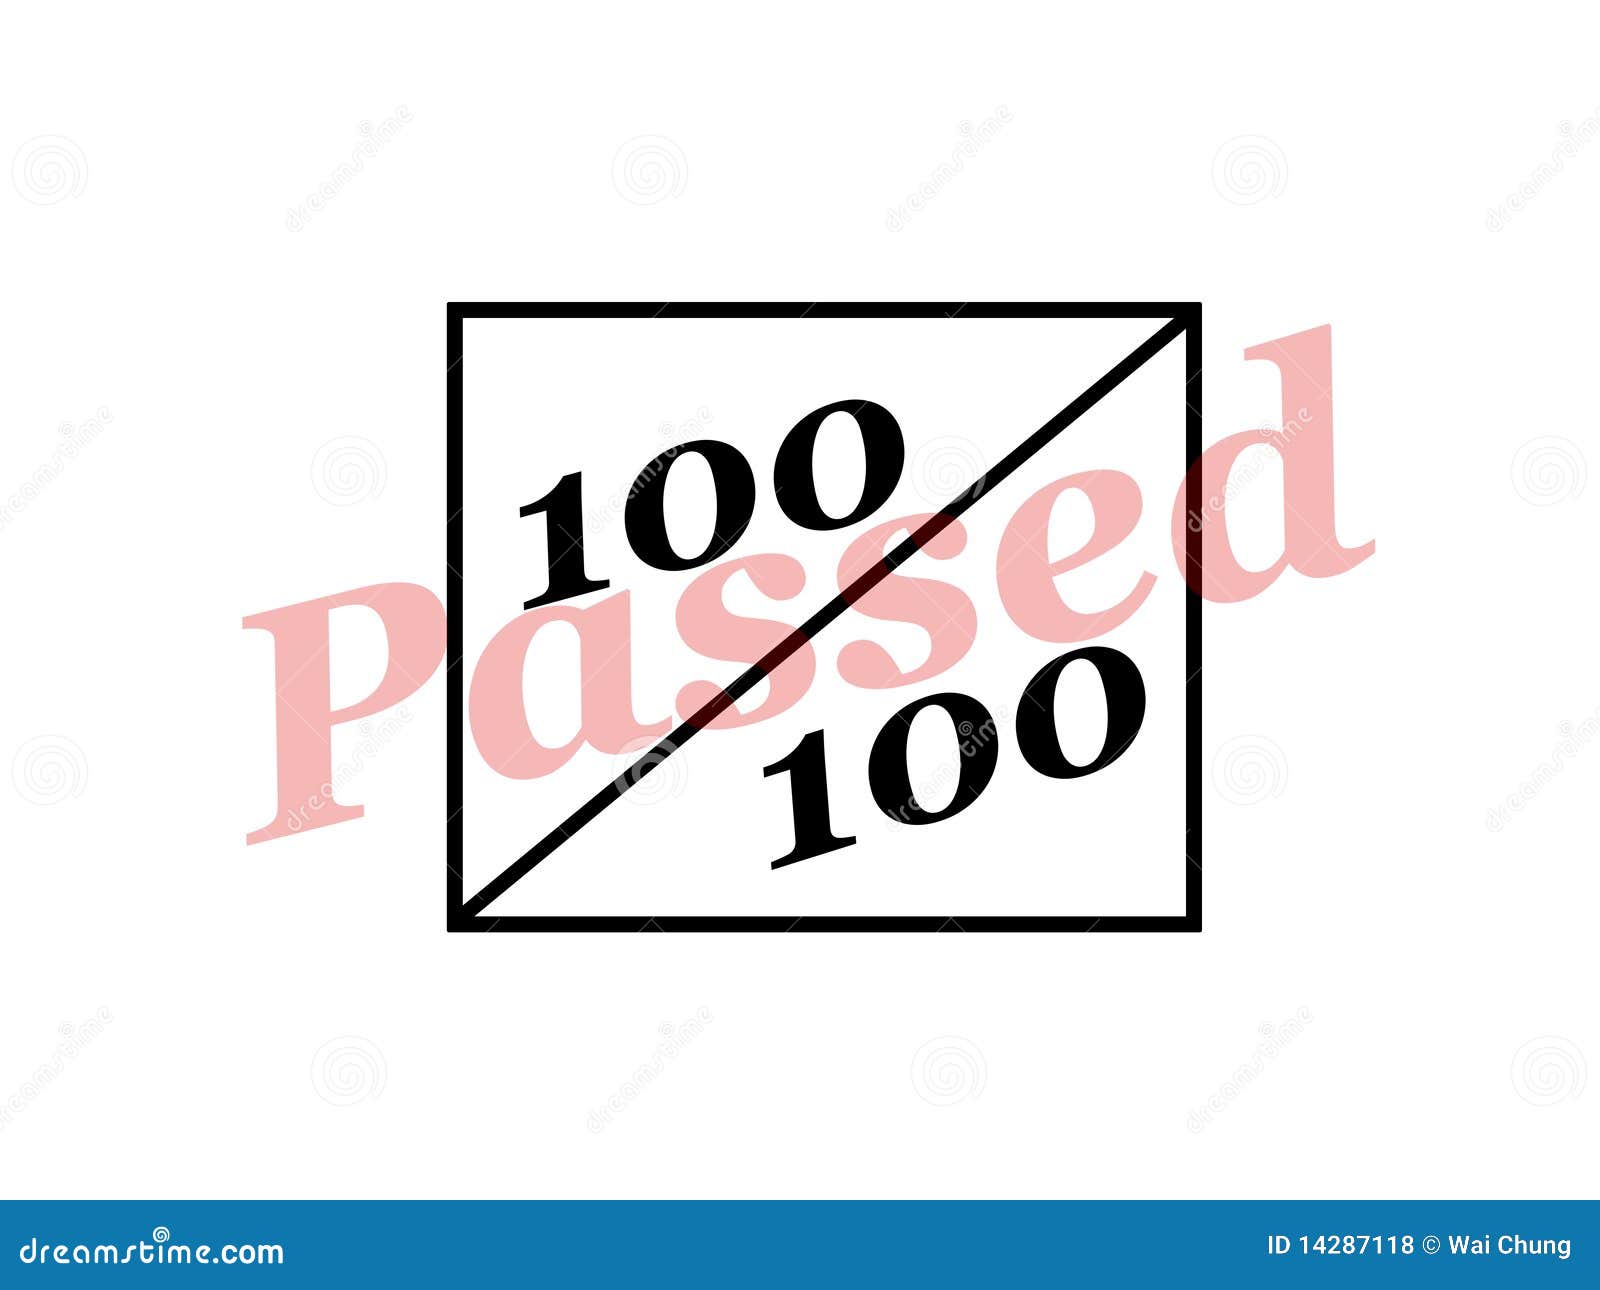 Passed With Full Marks Sign Stock Illustration Illustration Of Number Exam